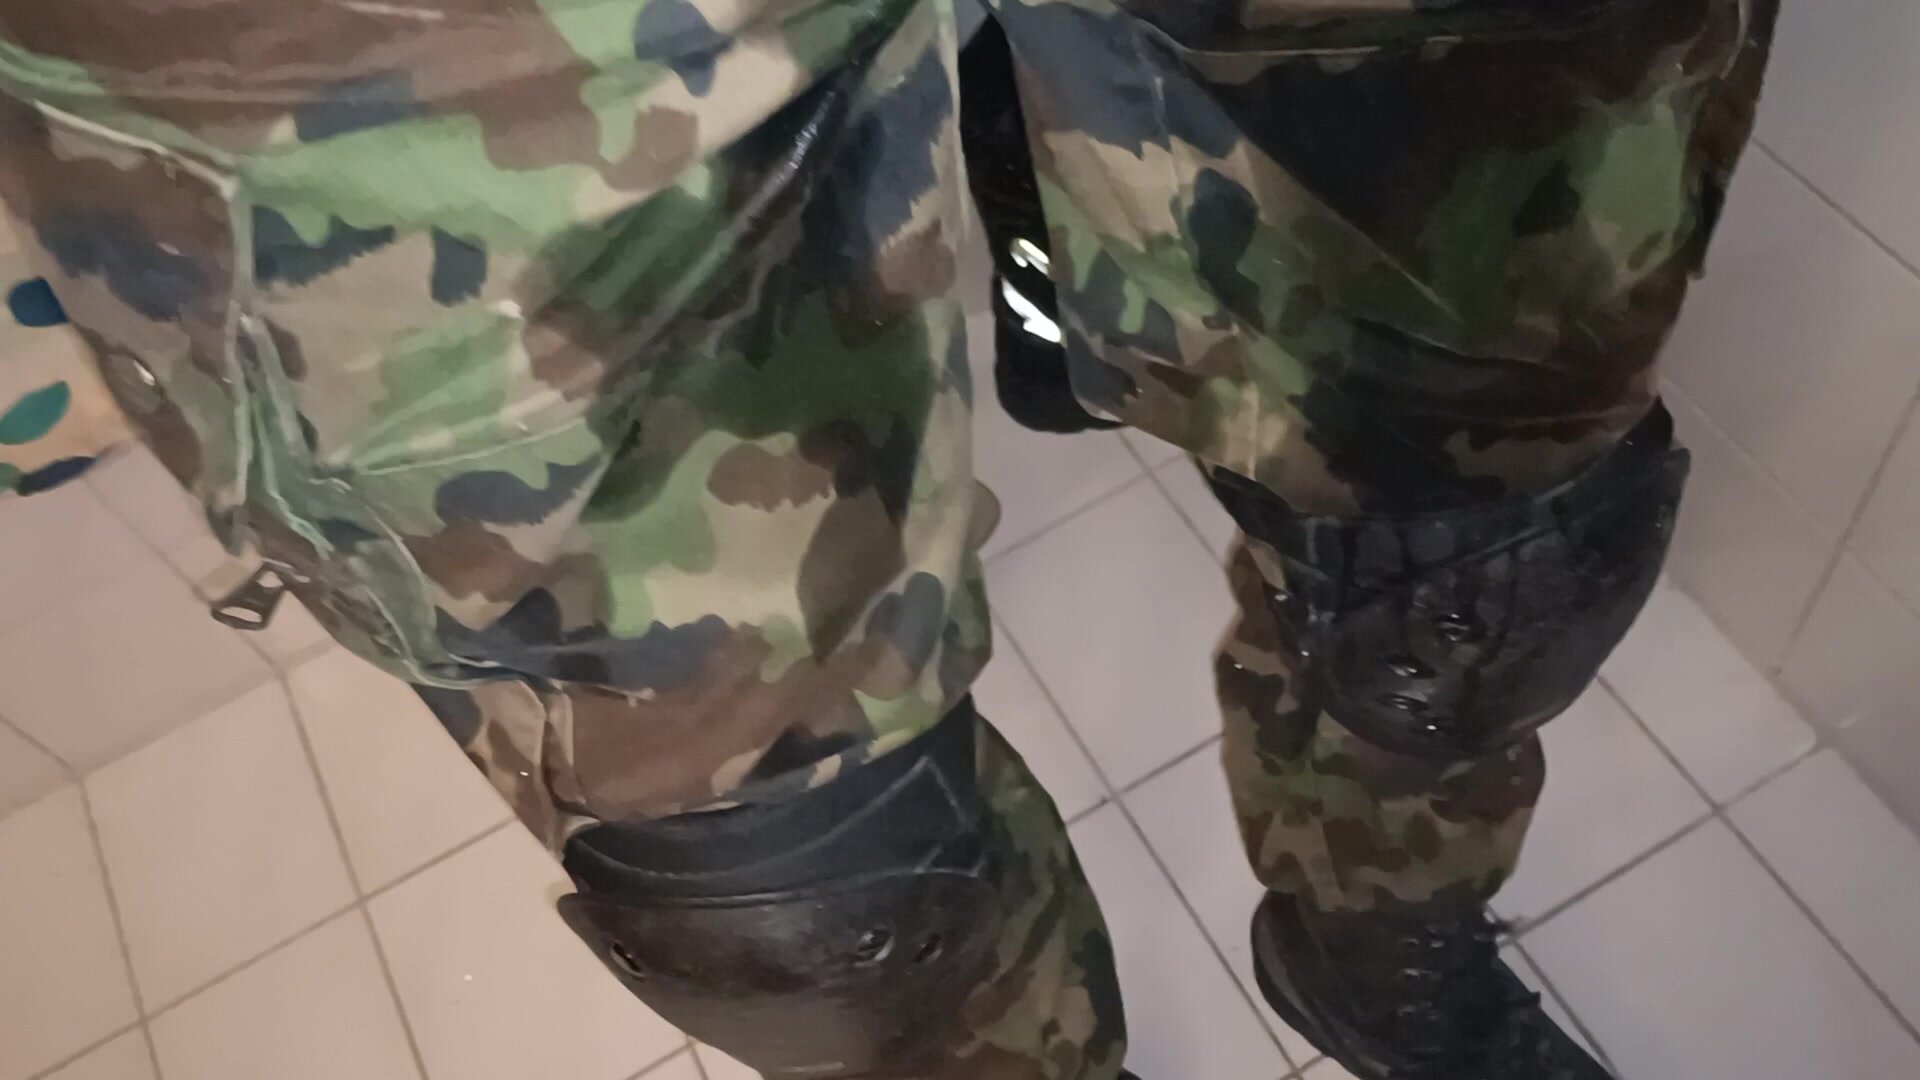 Piss over my swiss army camo uniform on the toilet